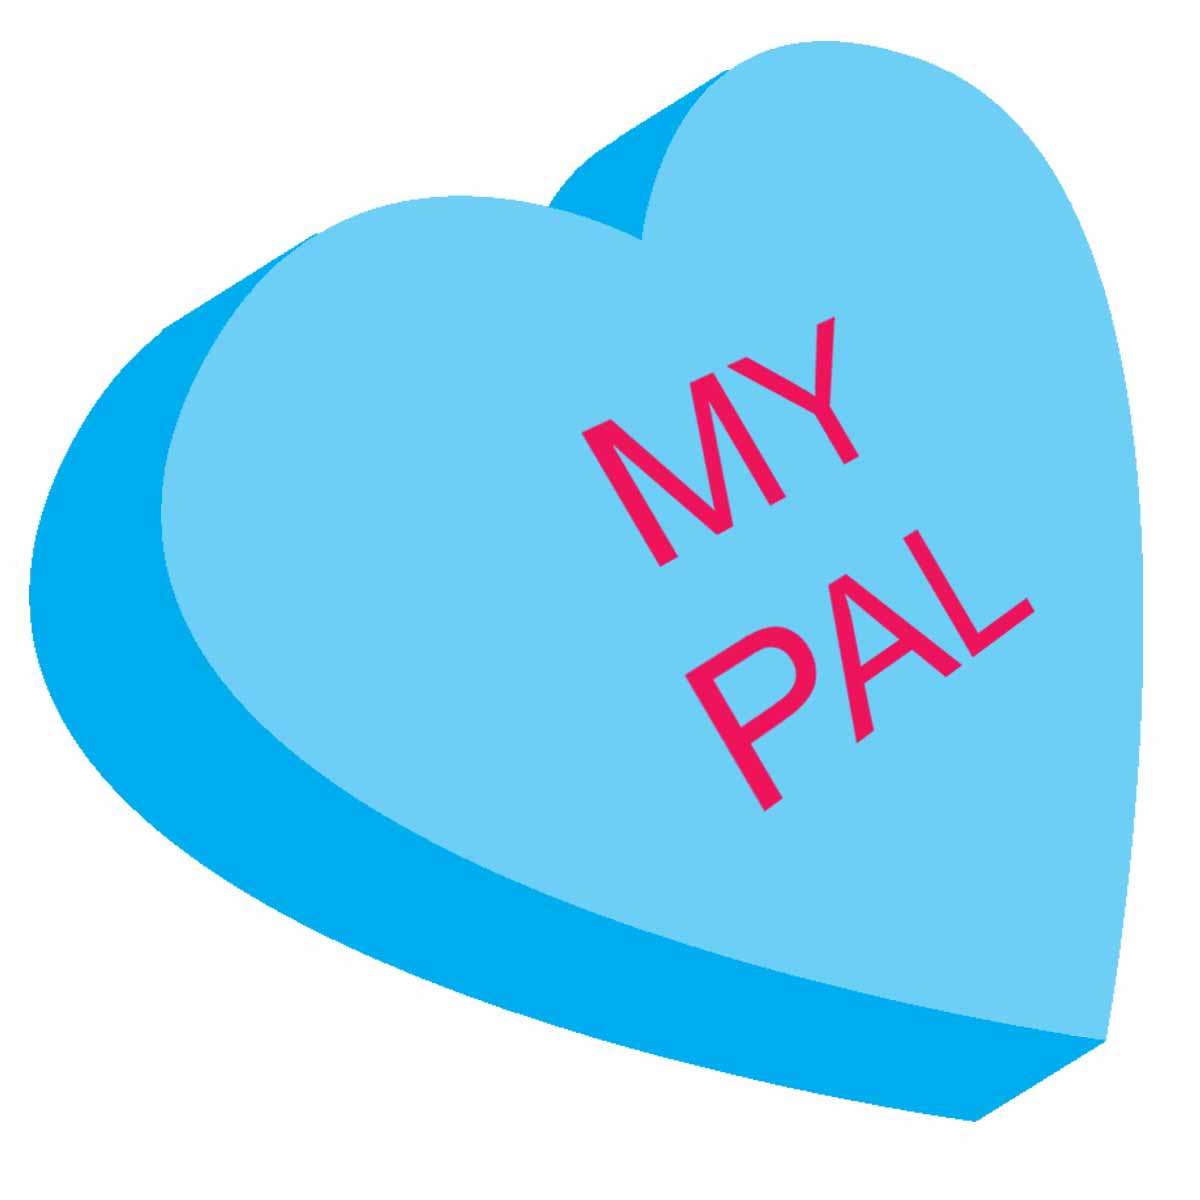 Free Candy Hearts Cliparts, Download Free Clip Art, Free.